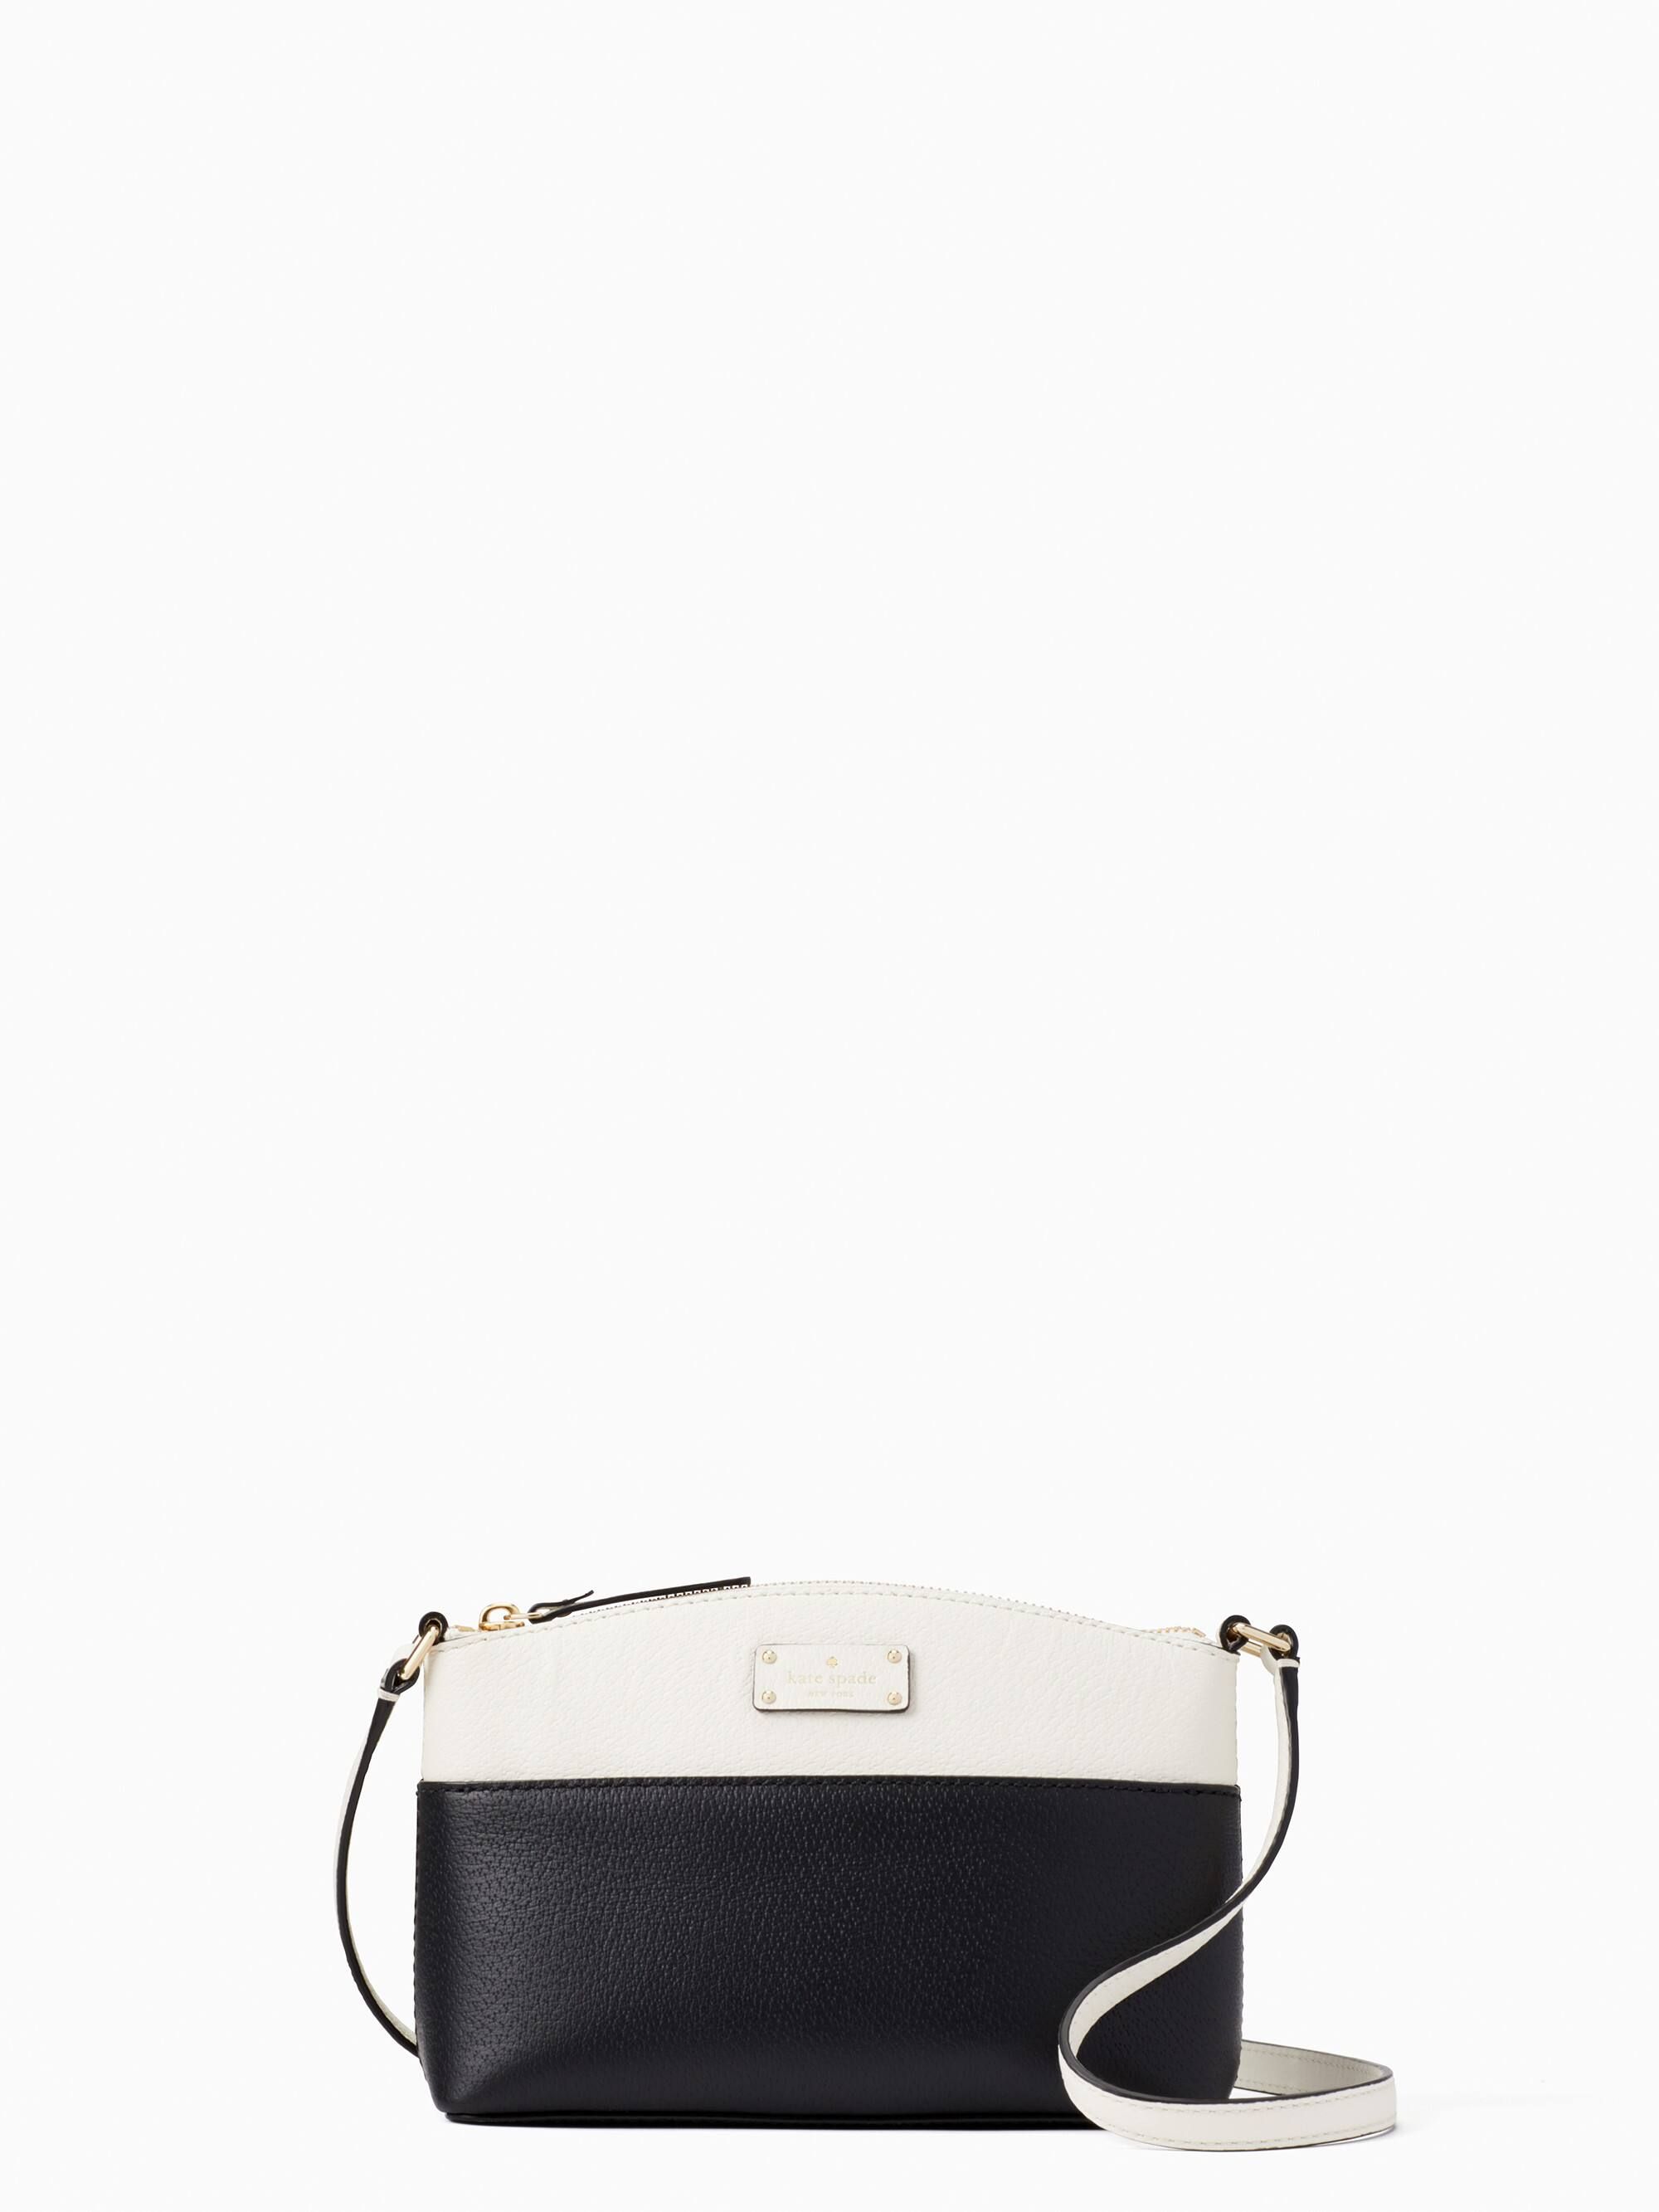 grove street millie | Kate Spade Outlet